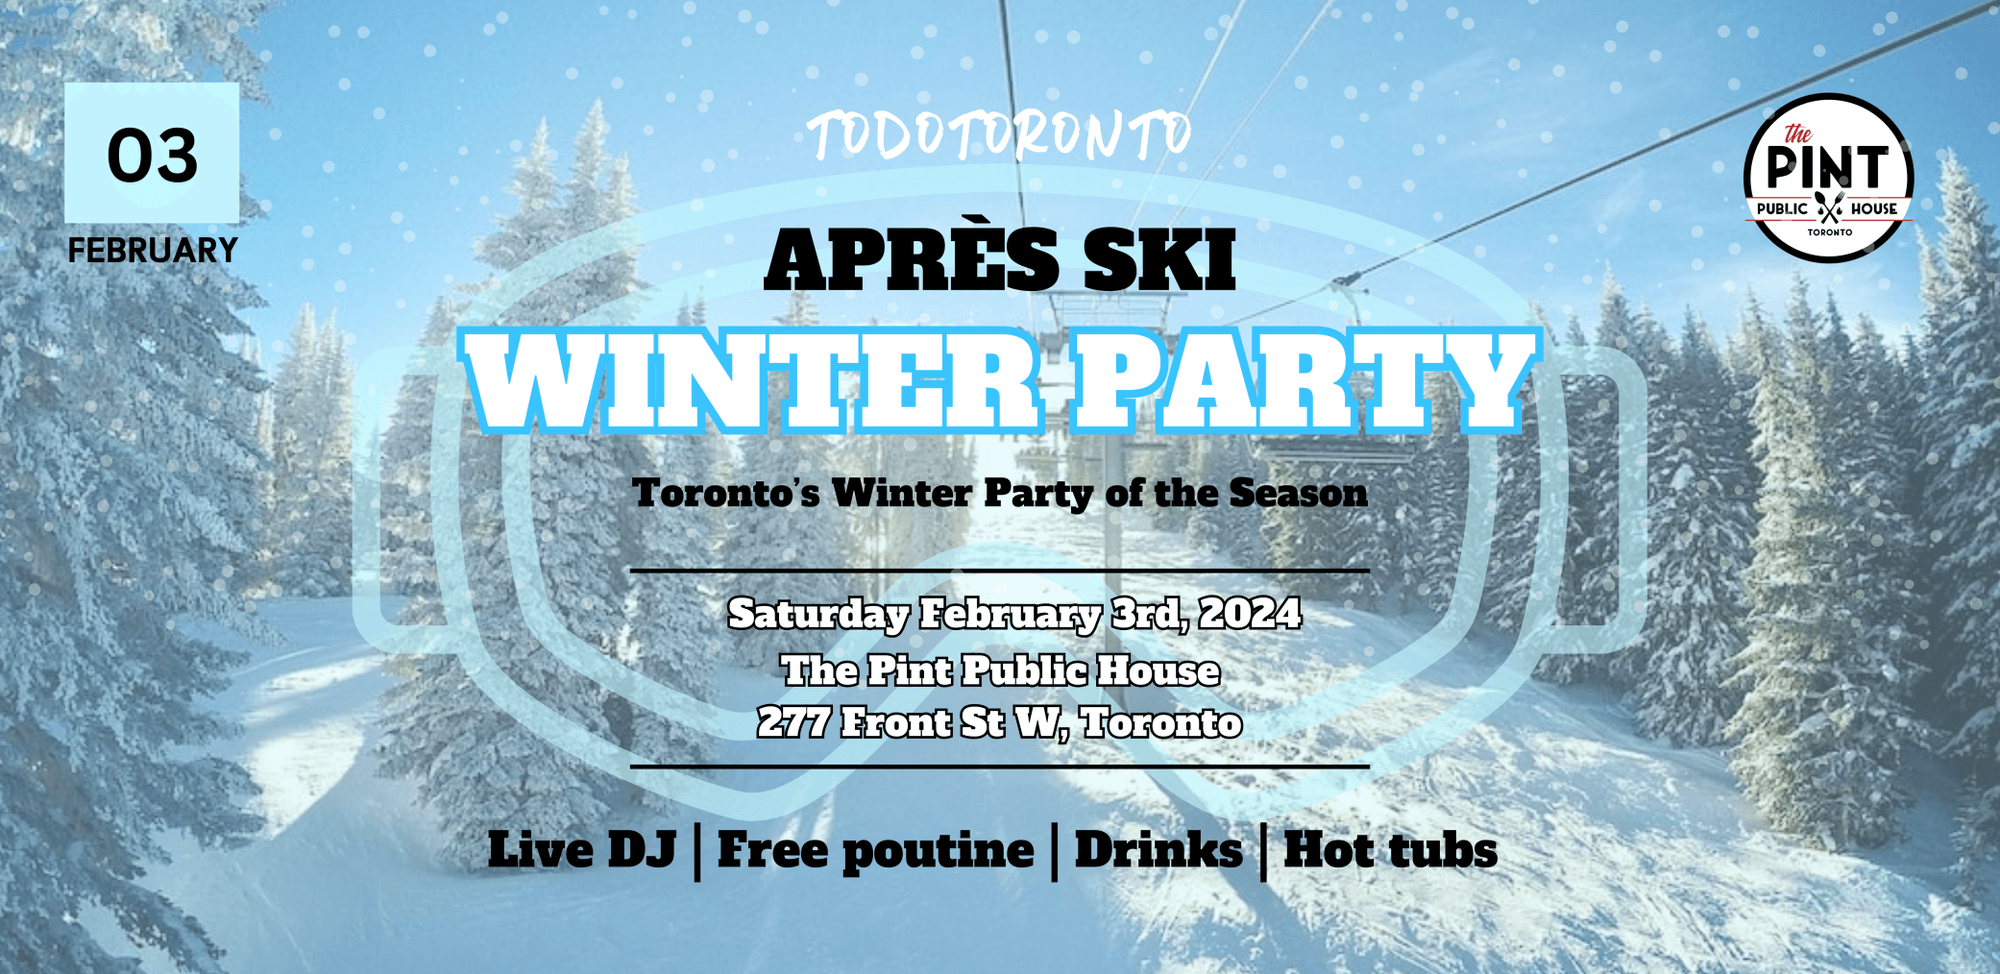 Poster for Apres Ski Winter Party.